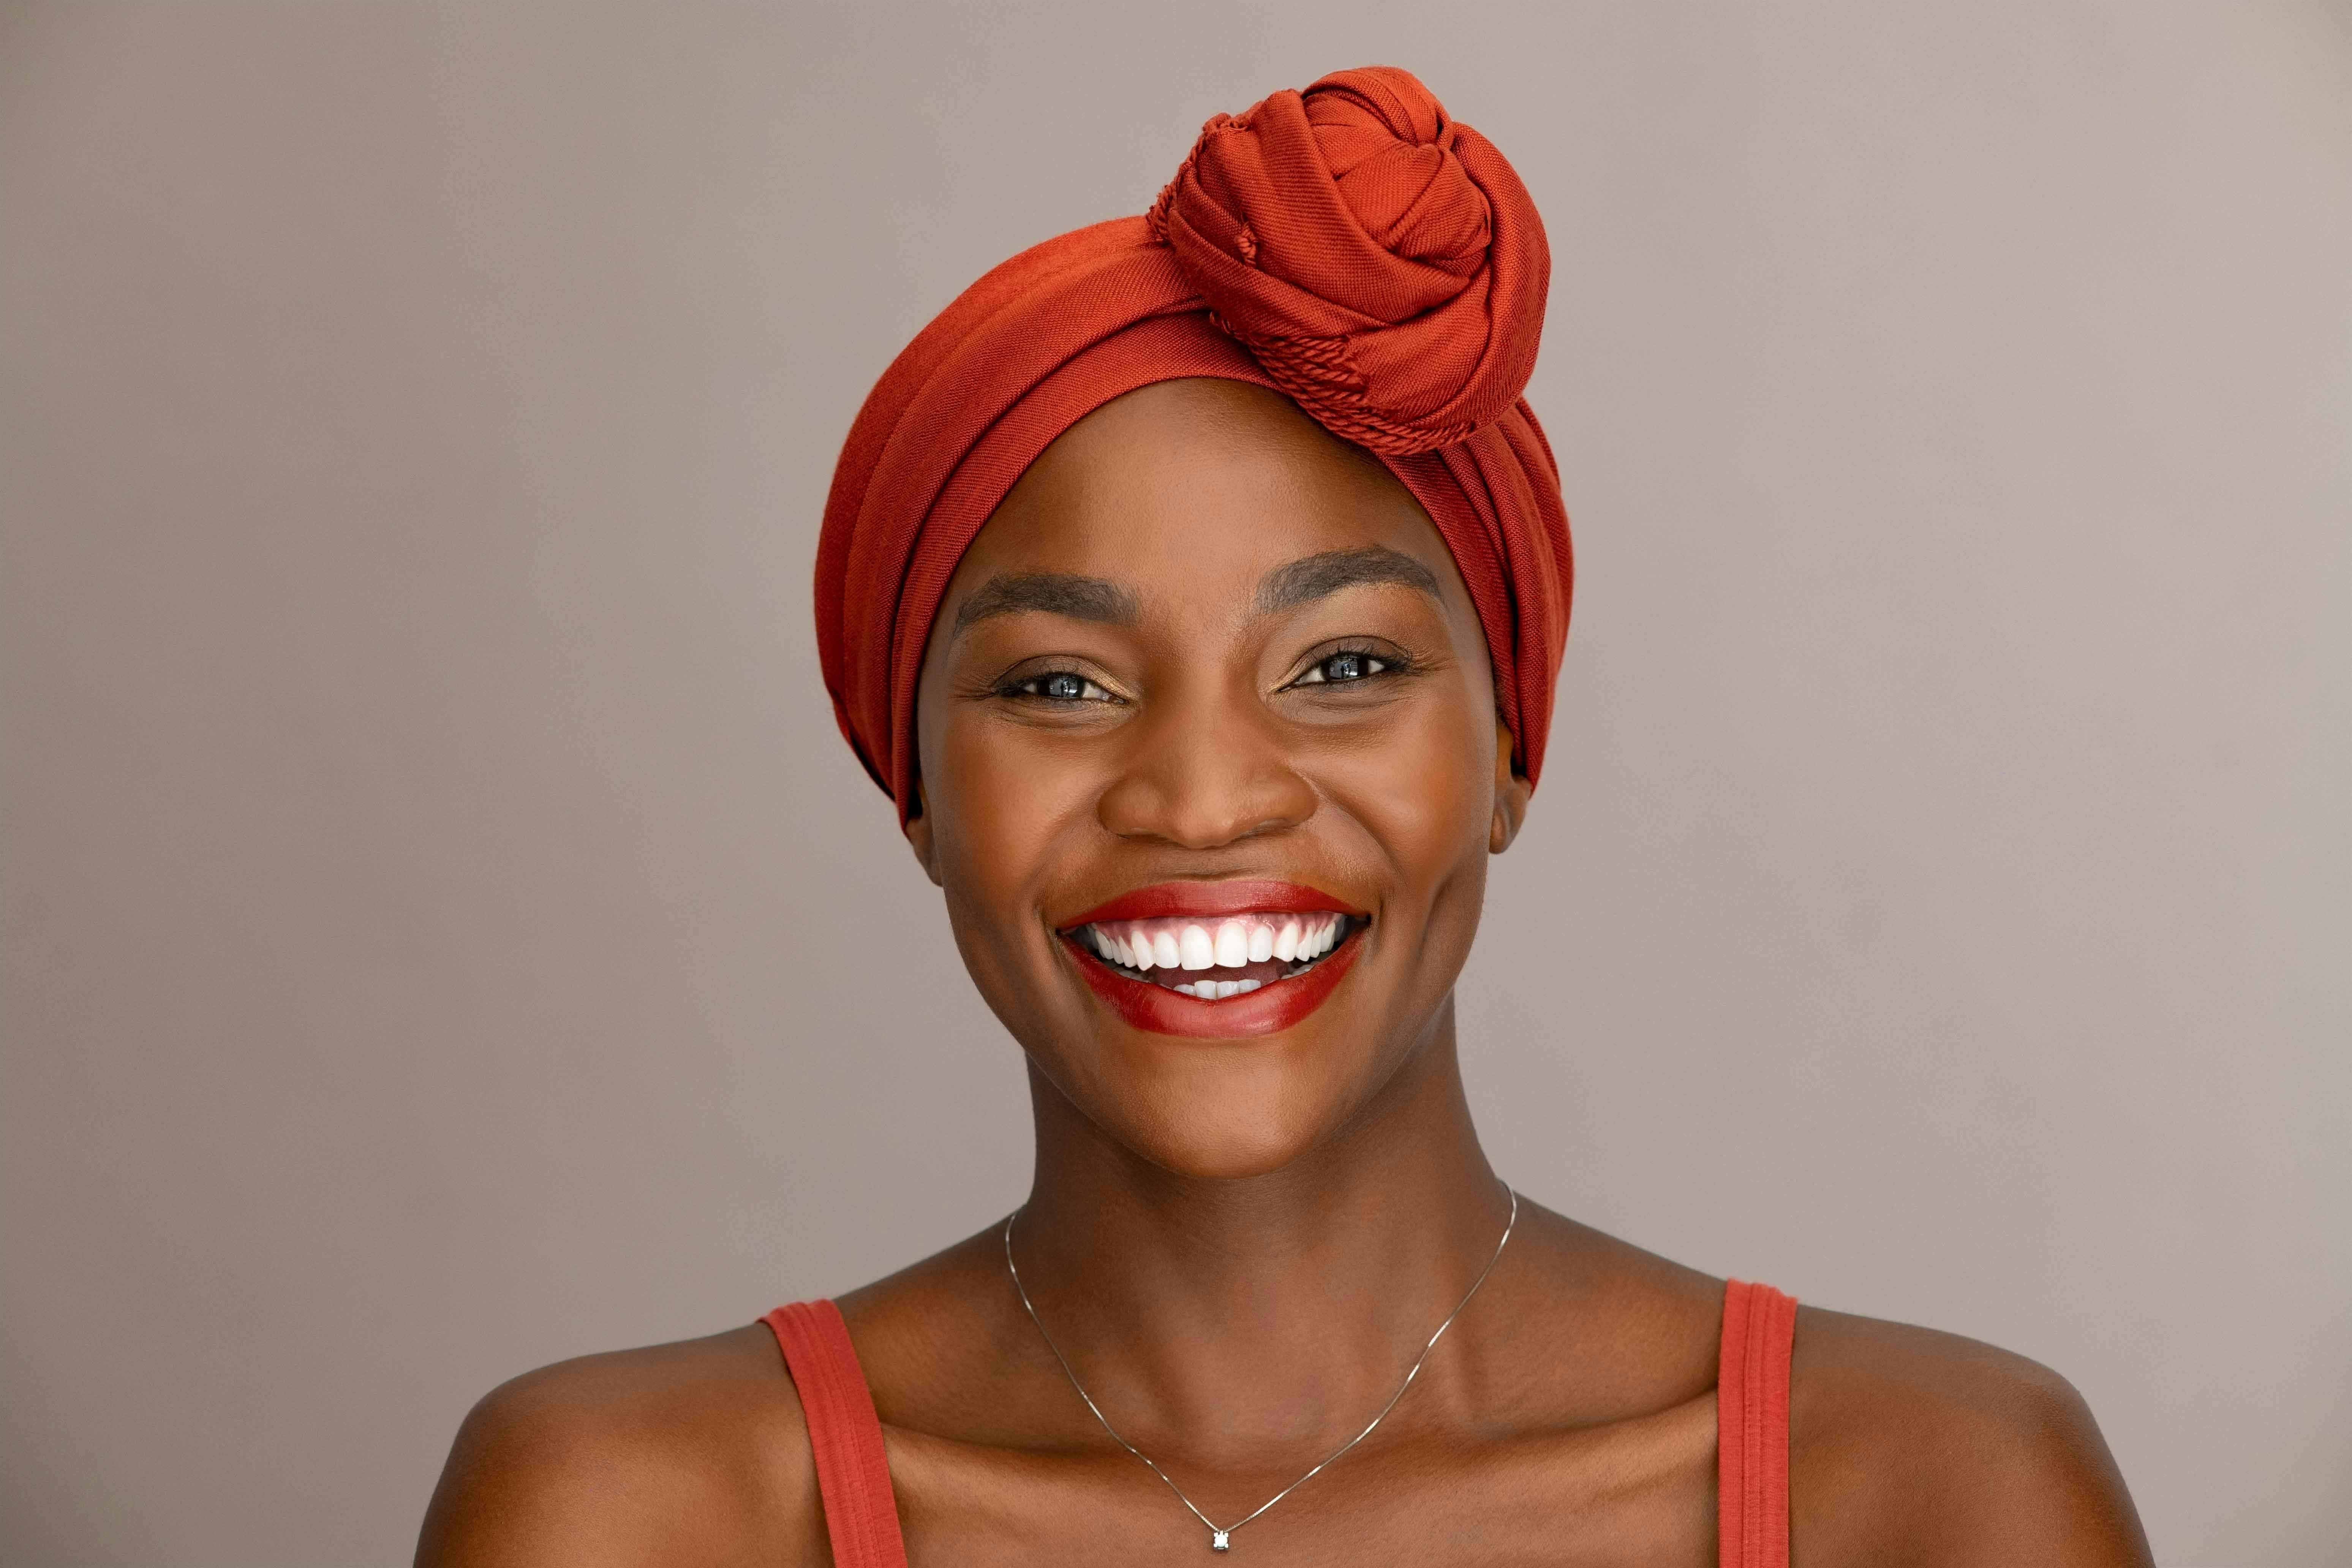 African woman with bright white teeth and red headscarf